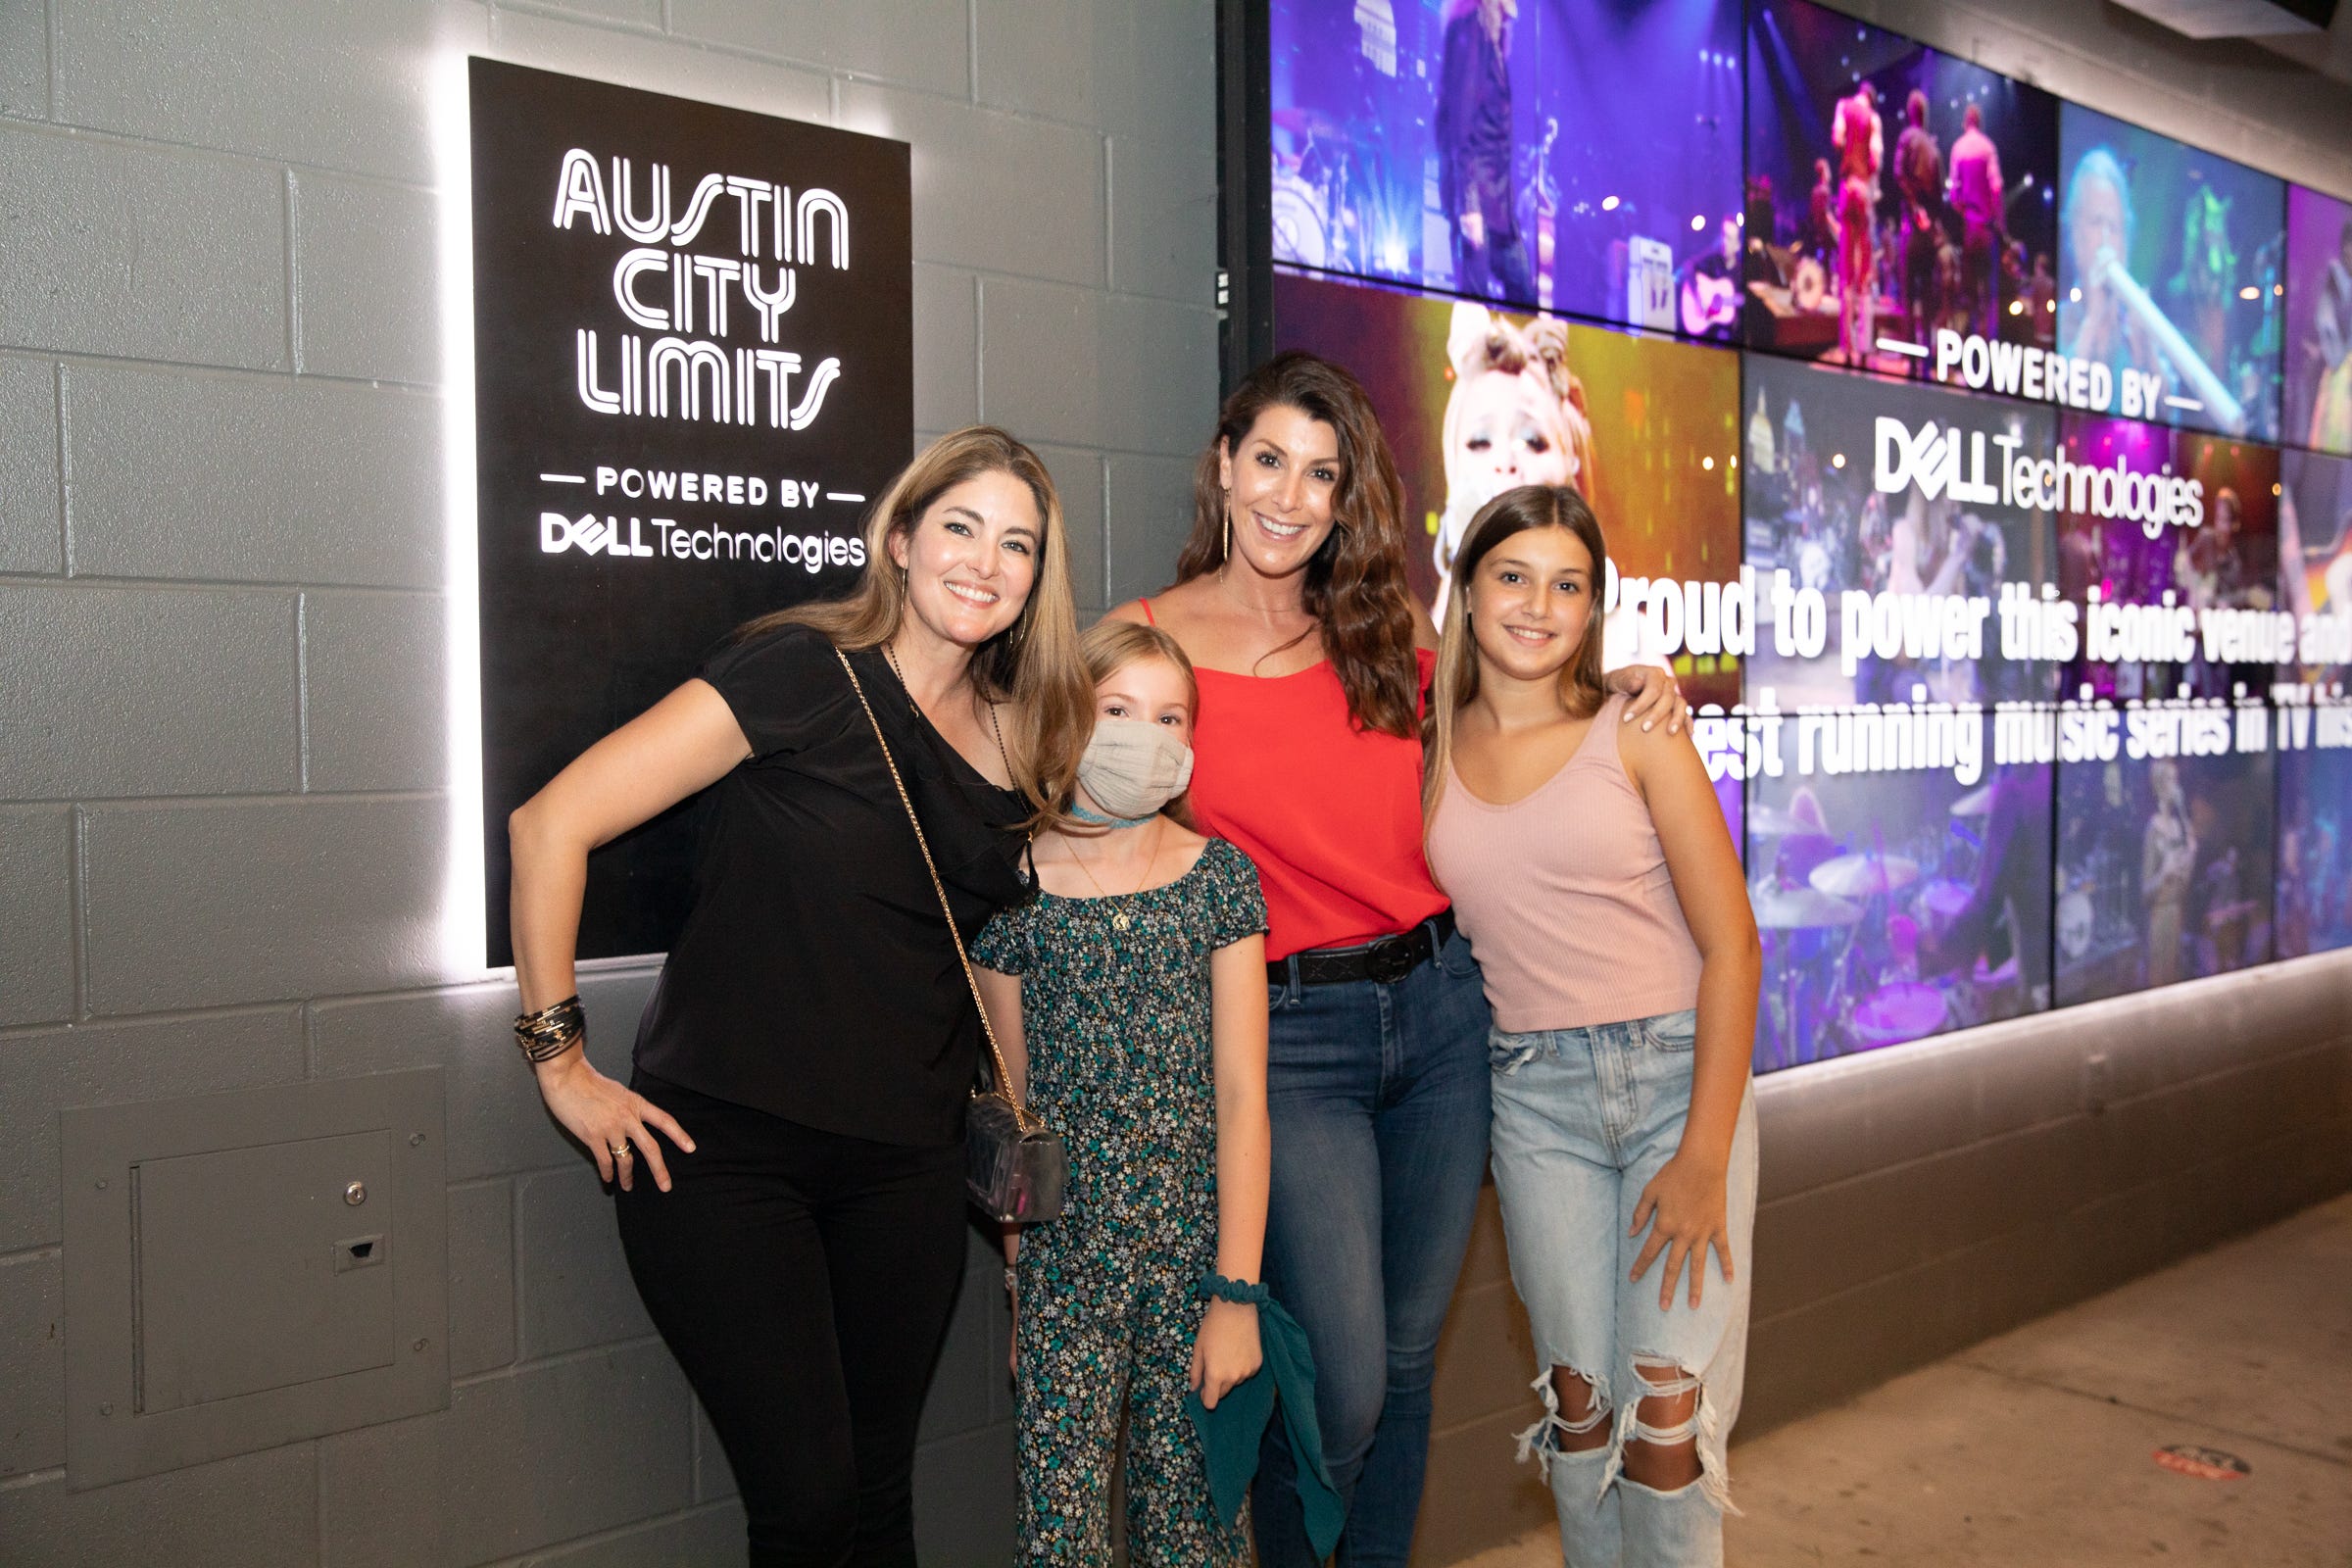 Teen pop sensation Olivia Rodrigo makes her debut on the "Austin City Limits" stage on Saturday, Oct. 2, 2021, at ACL Live. Her episode will air as part of Season 47.